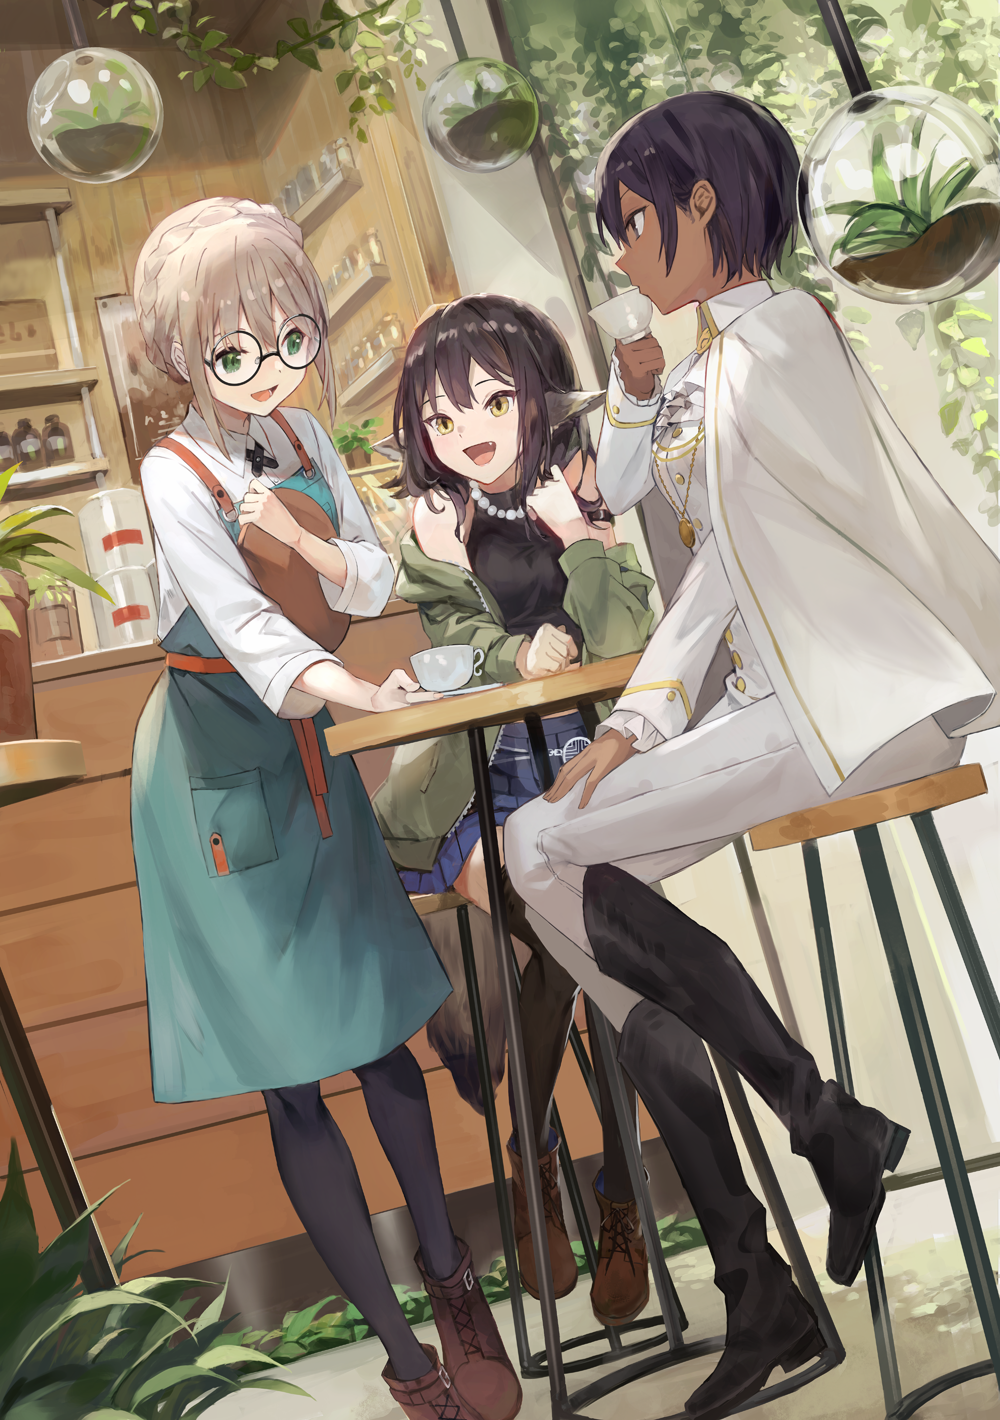 3girls animal_ears aspen_(please_be_happy) bangs braid cafe coffee_cup crown_braid cup dark-skinned_female dark_skin disposable_cup fox_girl glasses green_eyes highres juliet_(please_be_happy) kobuta long_hair miho_(please_be_happy) multiple_girls official_art open_mouth plant please_be_happy shirt short_hair sitting slit_pupils sphere standing stool table white_shirt yellow_eyes